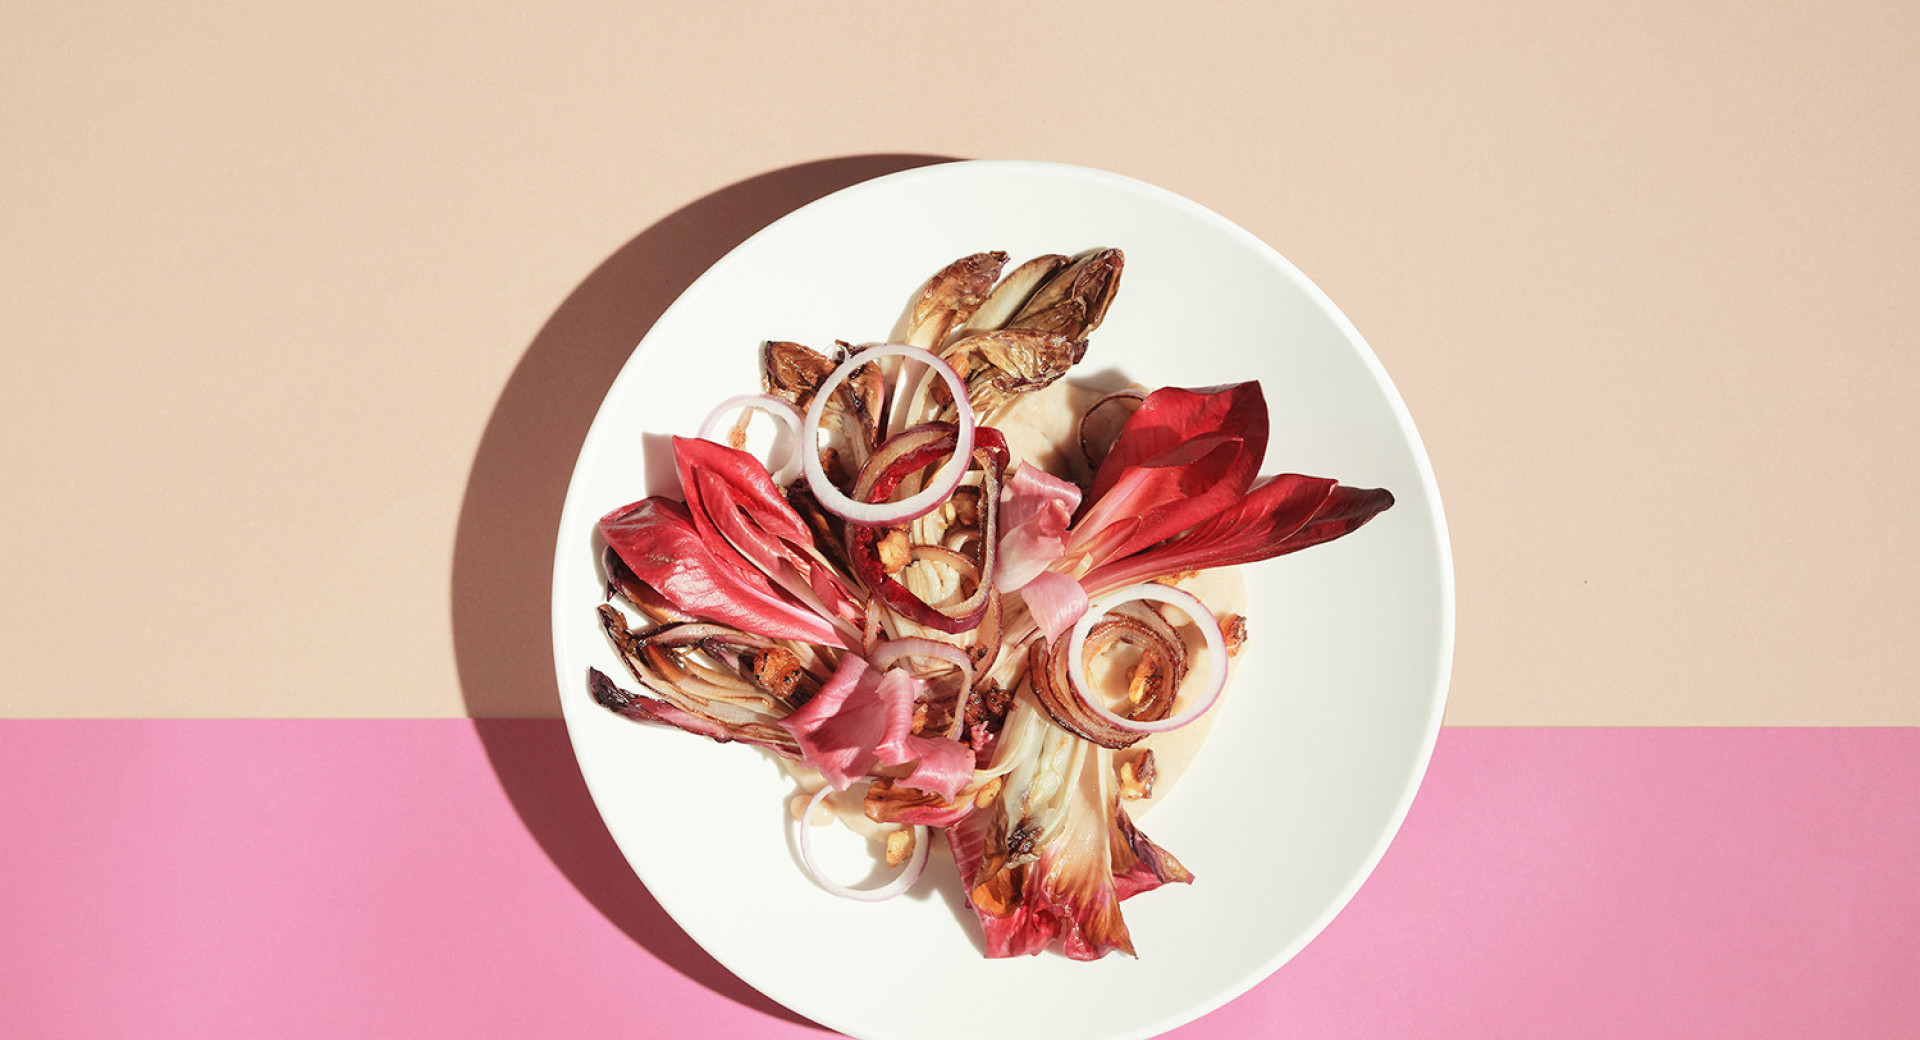  A white plate on a pink and orange background. On the plate, leaves of red radish, sprinkled with onion rings.